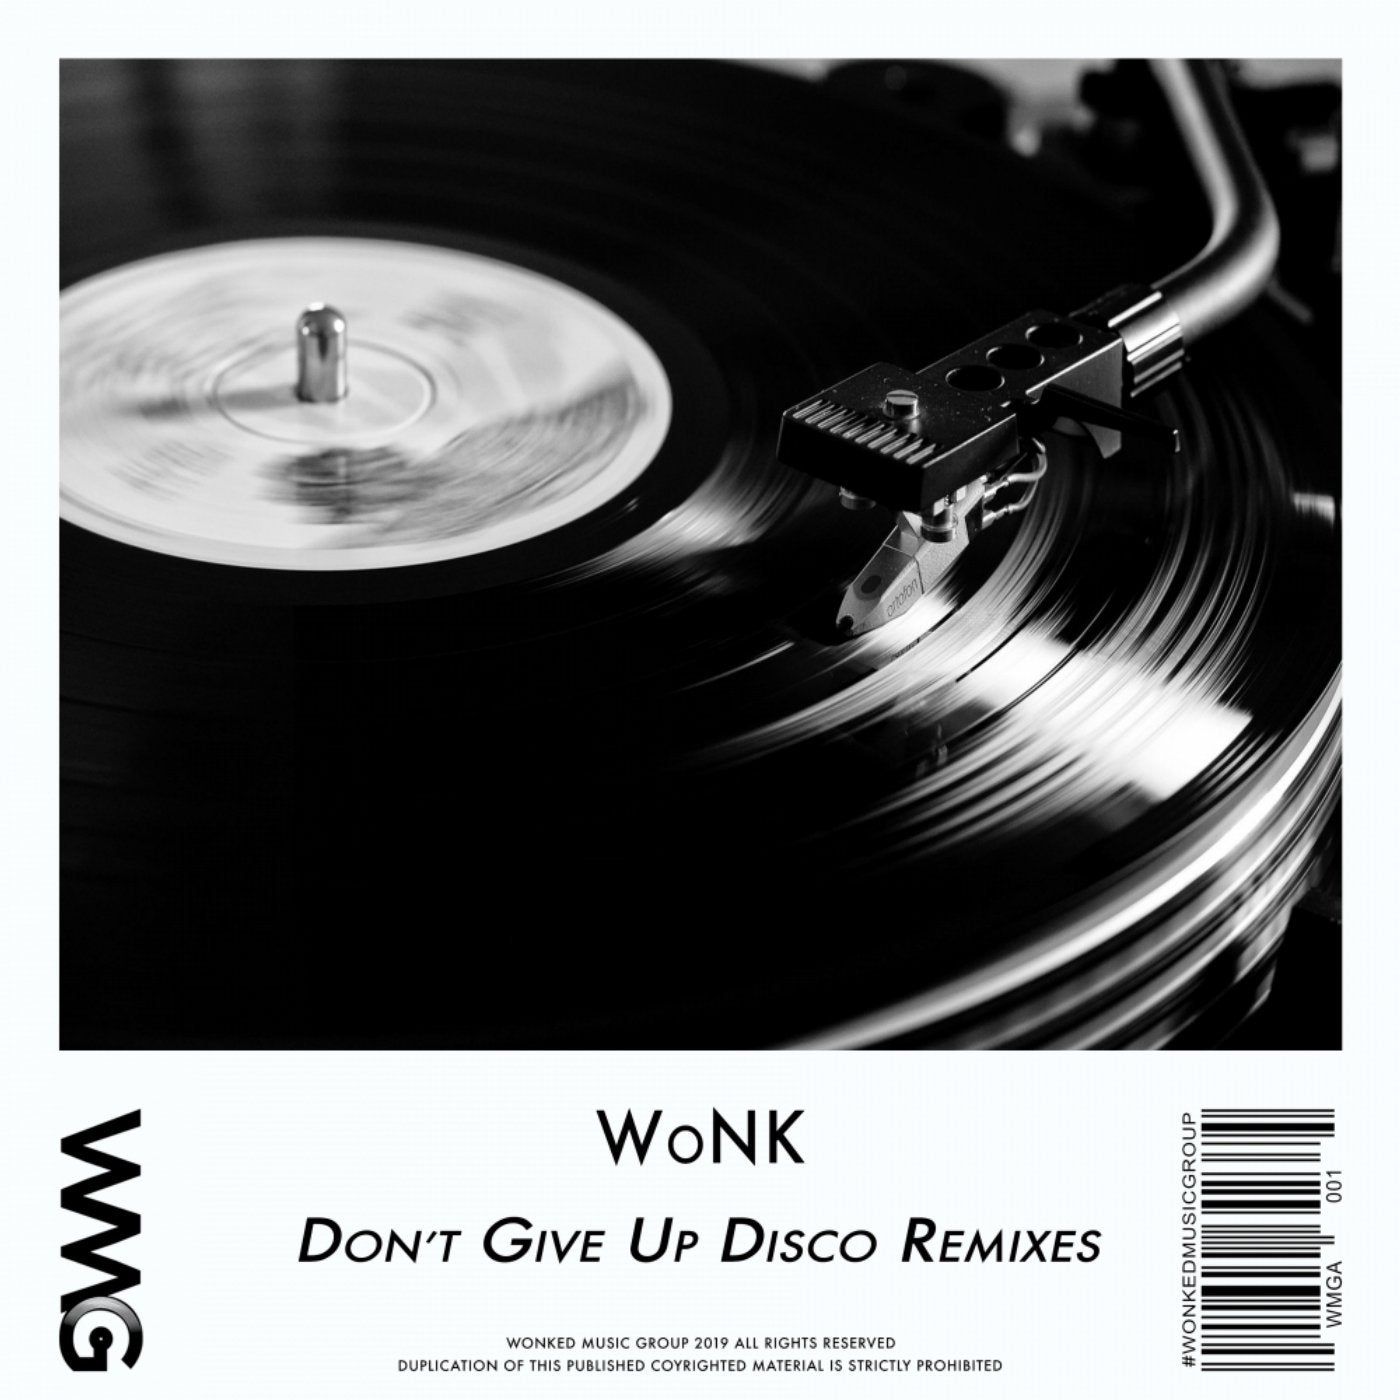 Don't Give Up Disco Remixes